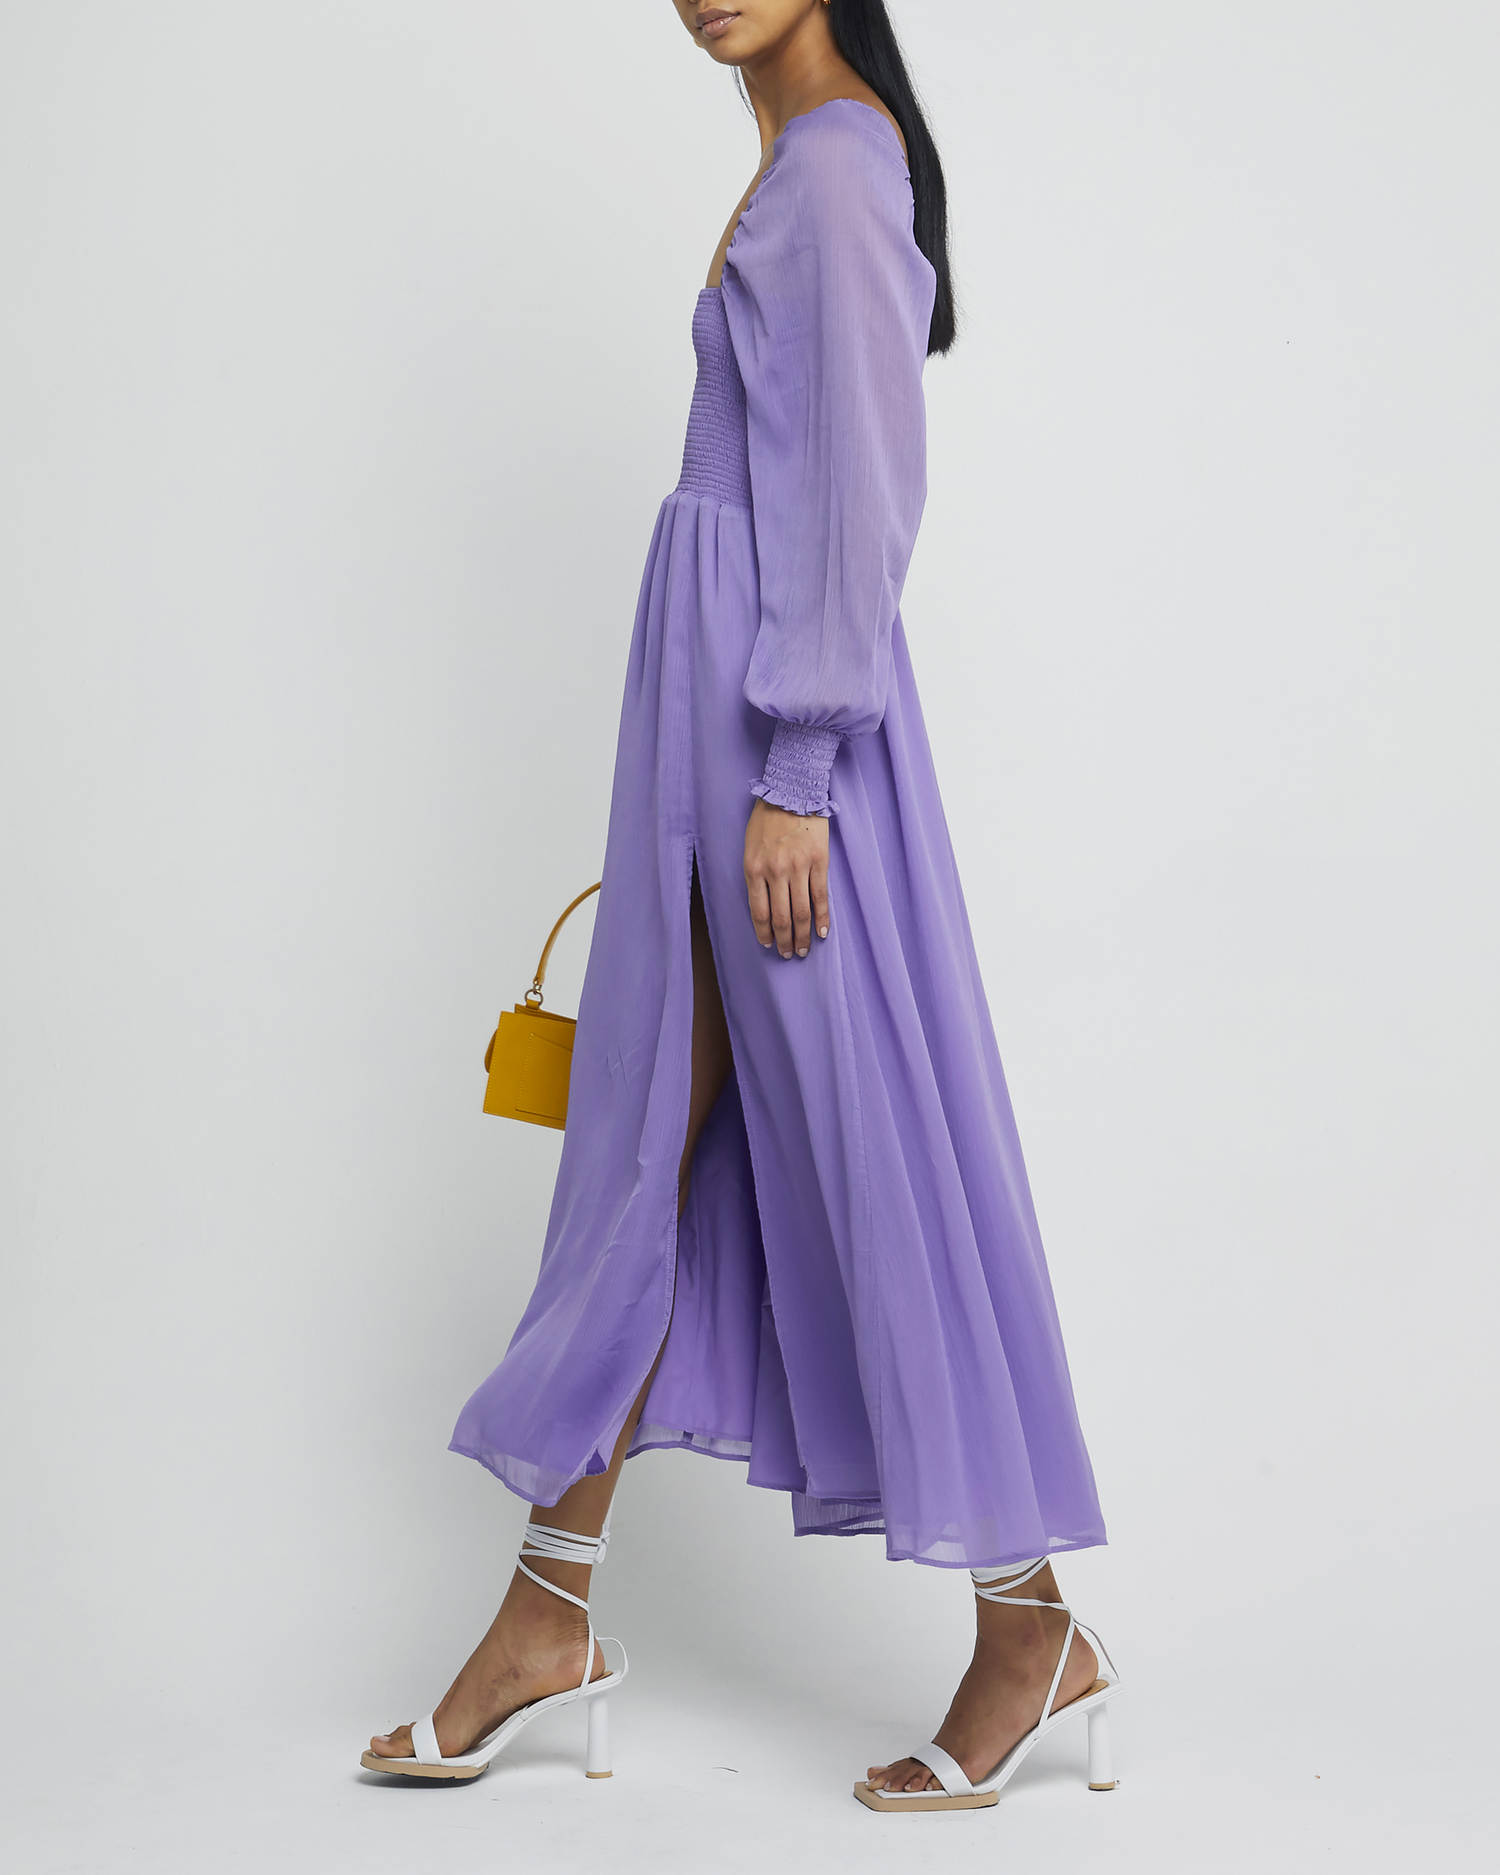 Third image of Classic Smocked Maxi Dress, a purple maxi dress, side slit, long, sheer sleeves, puff sleeves, square neckline, smocked bodice